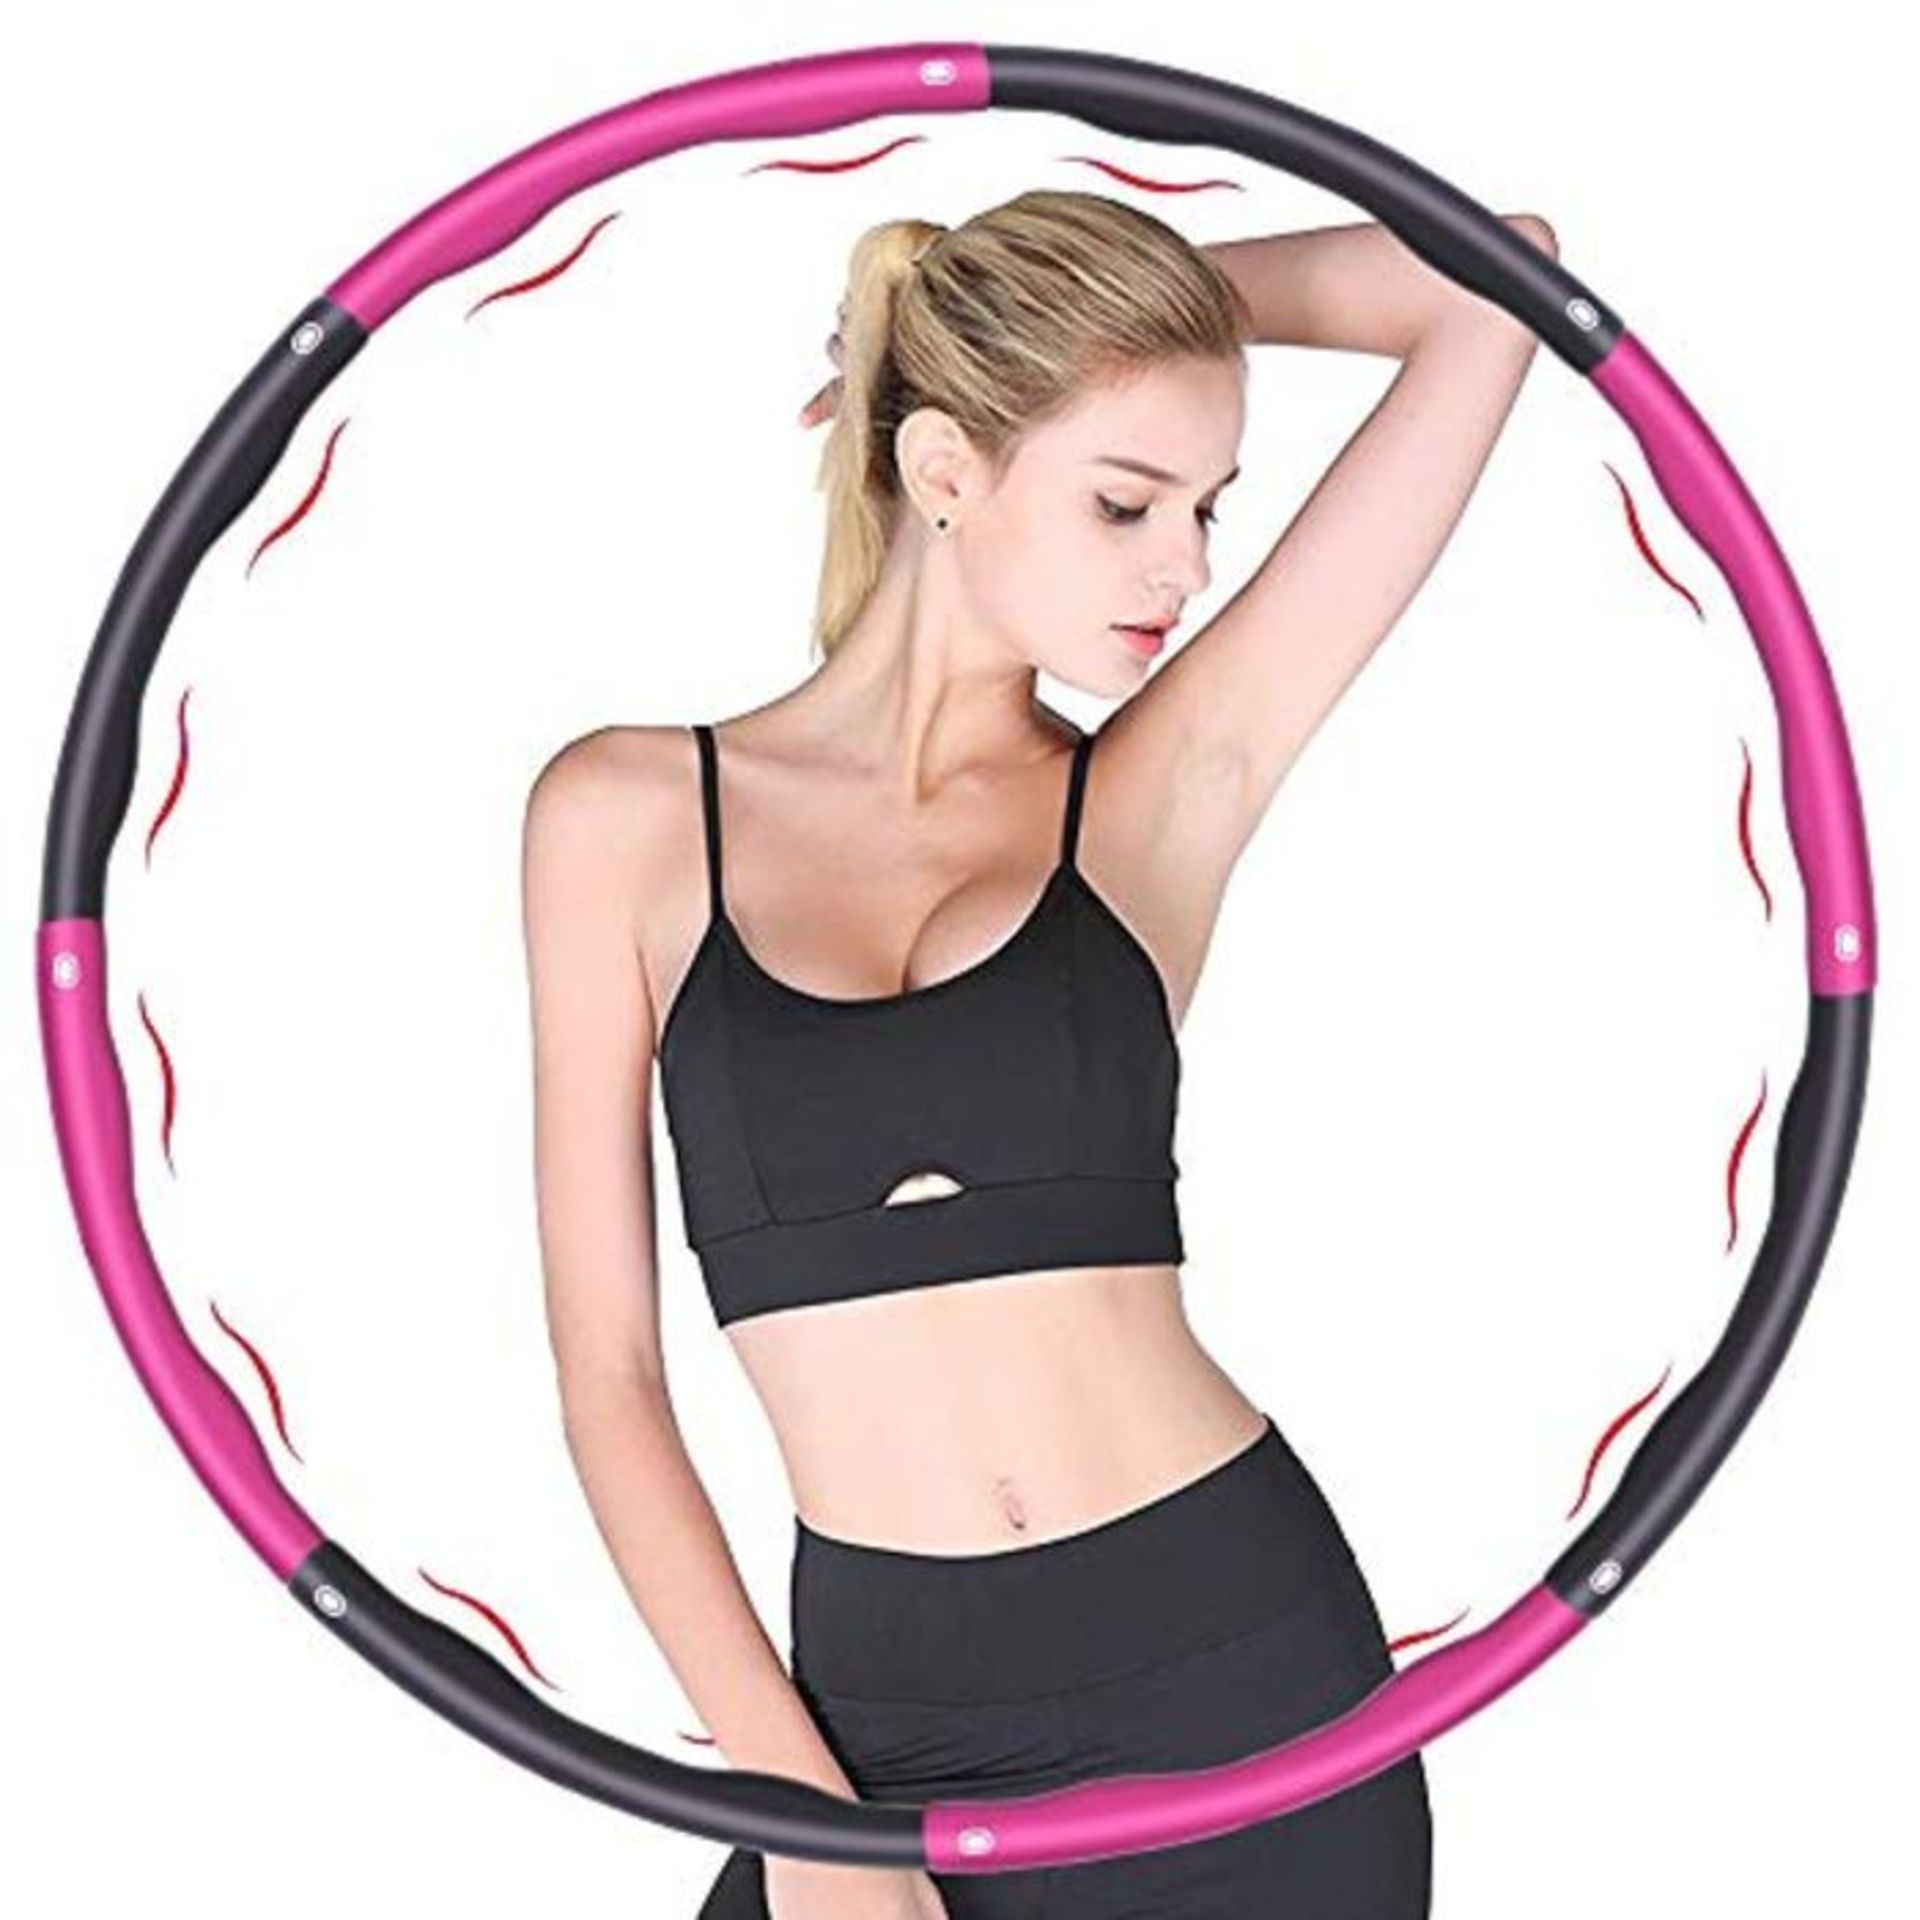 FAUA Hula Hoop, Used for Weight Loss and Massage, Can be Divided Into 6-8 Parts, 75-95